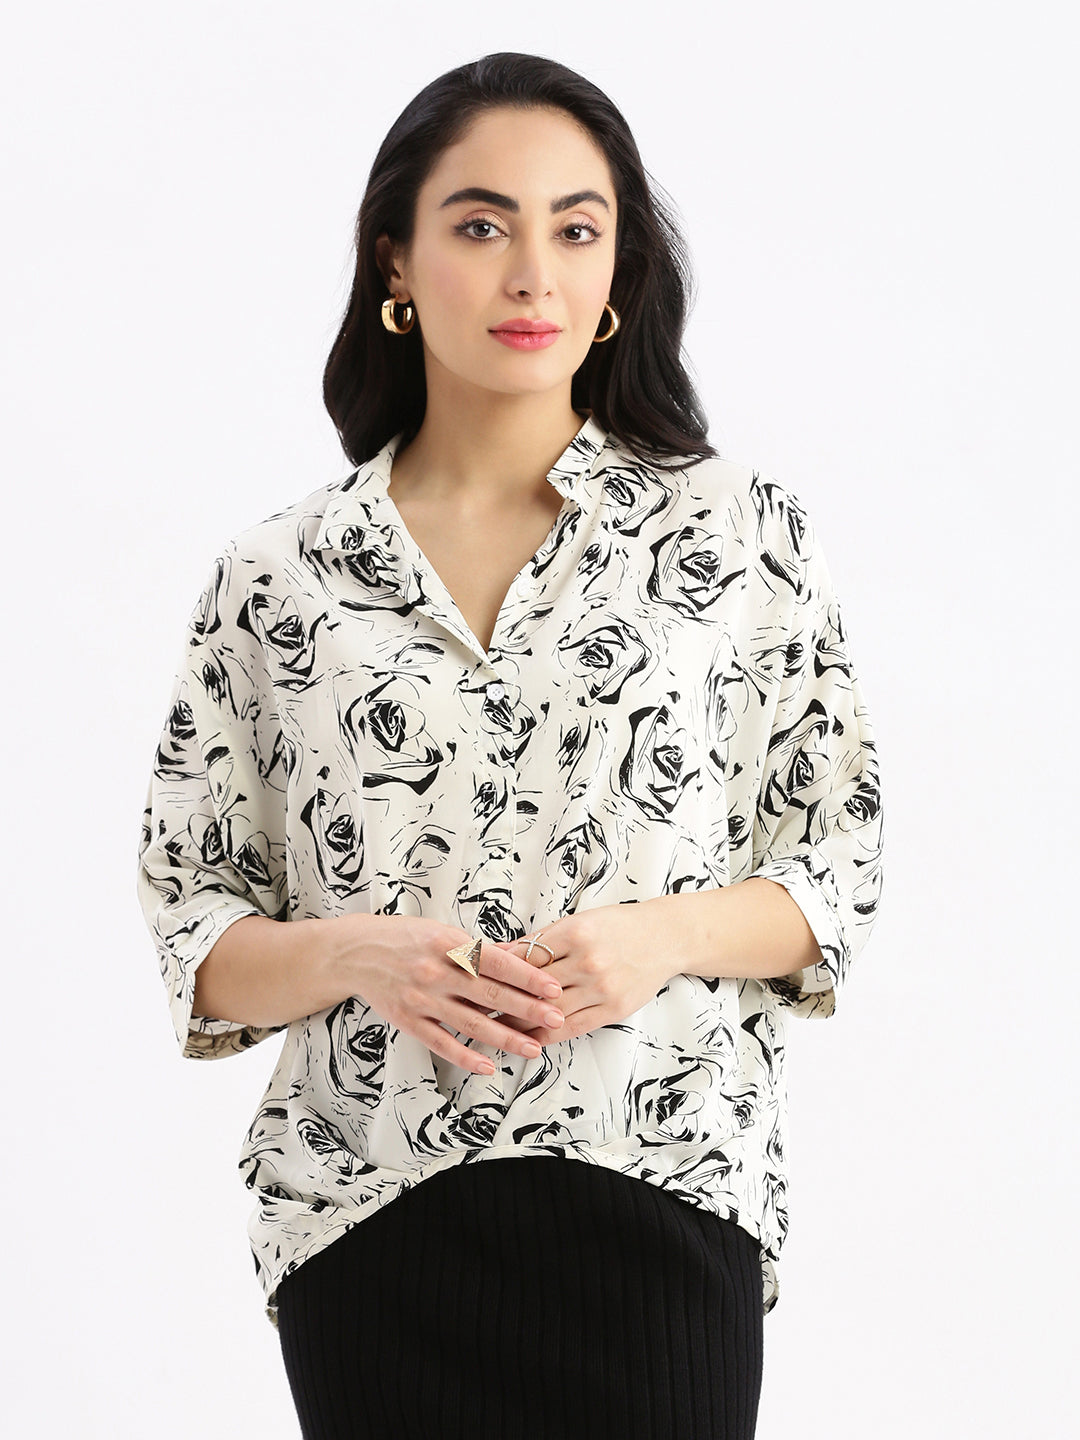 Women Floral Cream Shirt Style Oversized Top